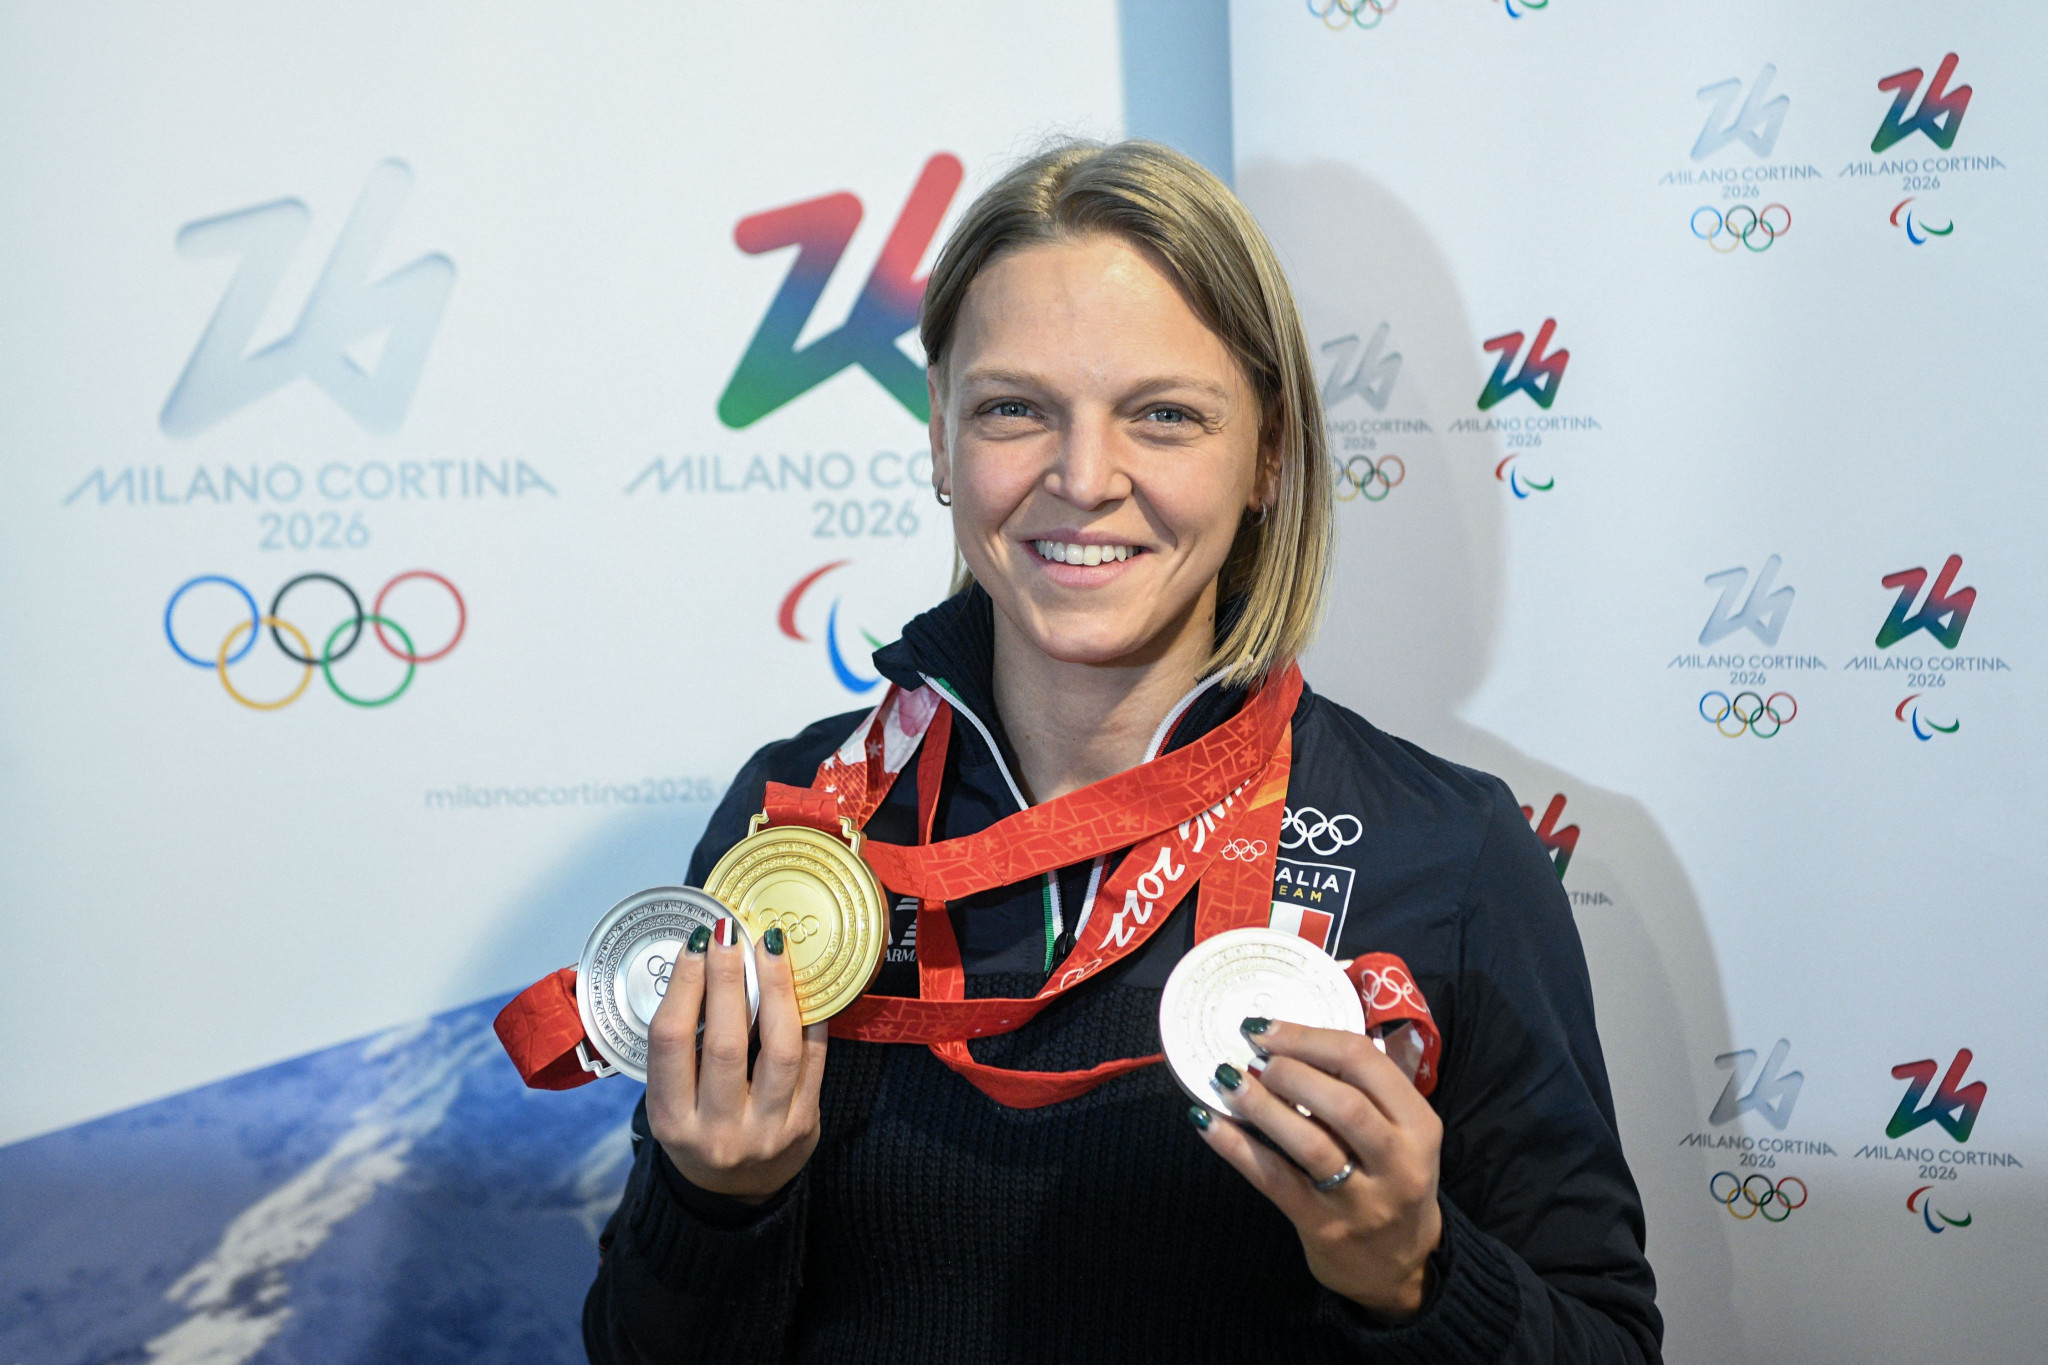 Italy's most successful female Olympian considering switching allegiances to US for Milan Cortina 2026